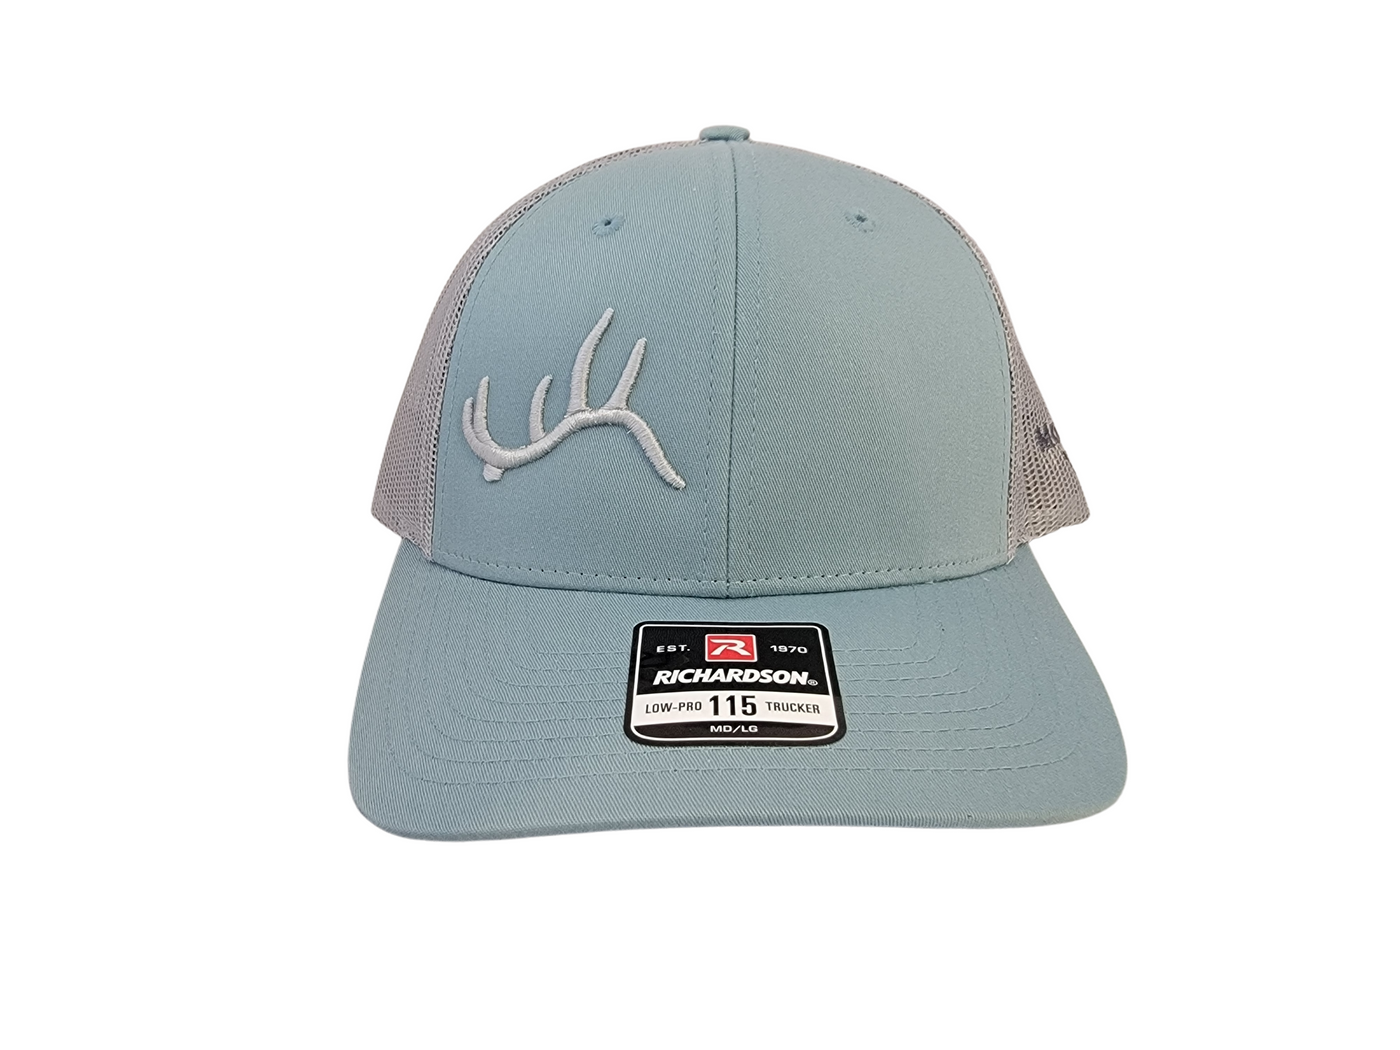 3D Shed - Light Teal / Silver (Women's)